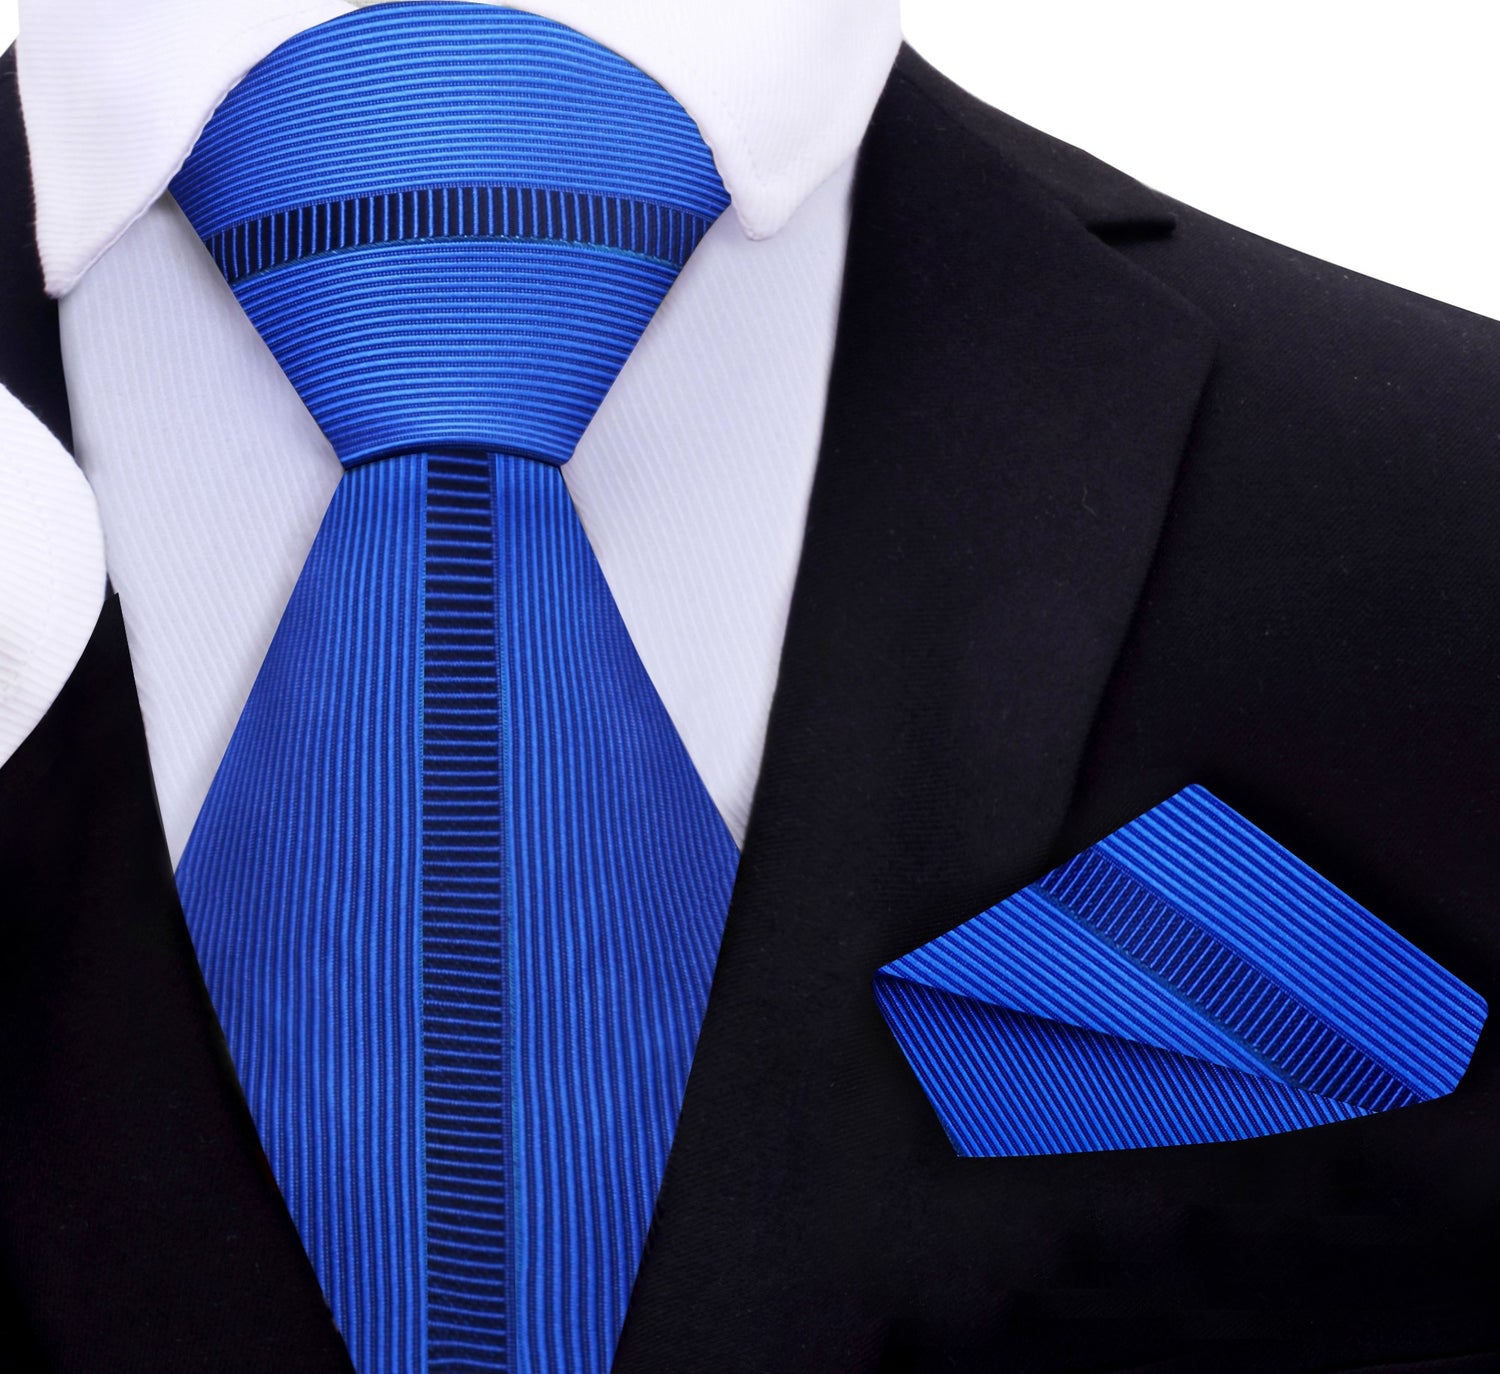 A Blue Tie With A Dark Blue Line Down The Center Tie and Pocket Square.